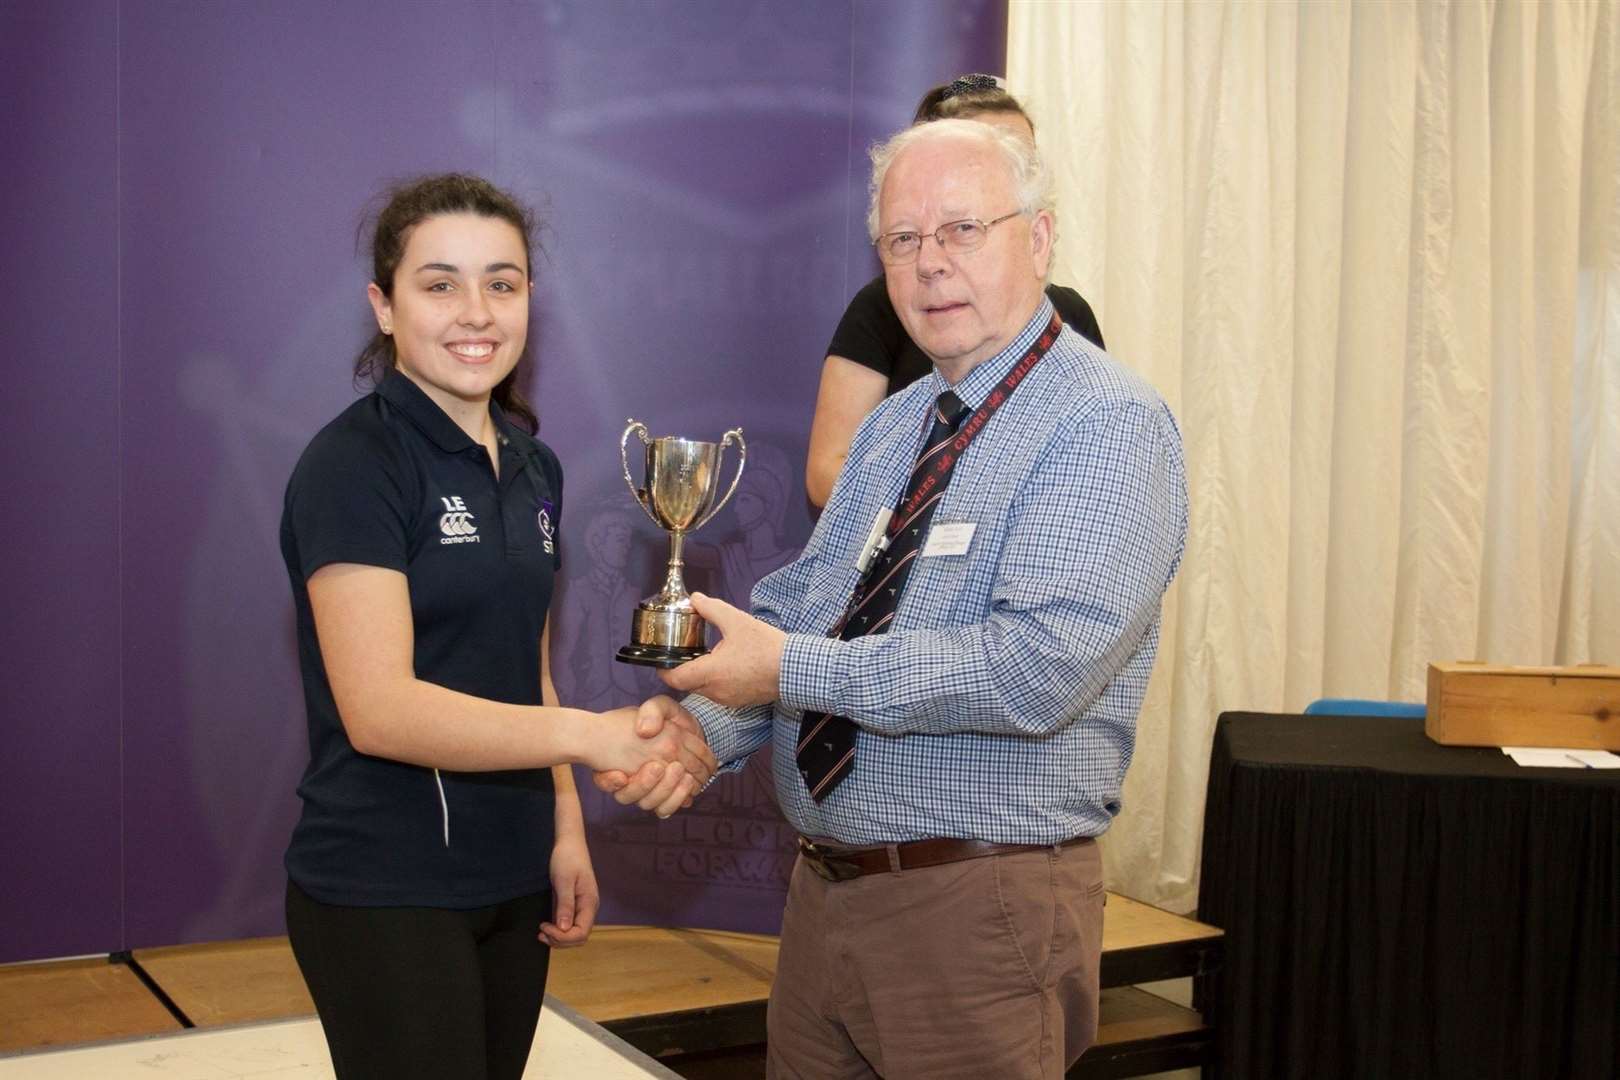 Forres shooter Lucy Evans receiving her trophy from John Lloyd, chairman of the NSRA.